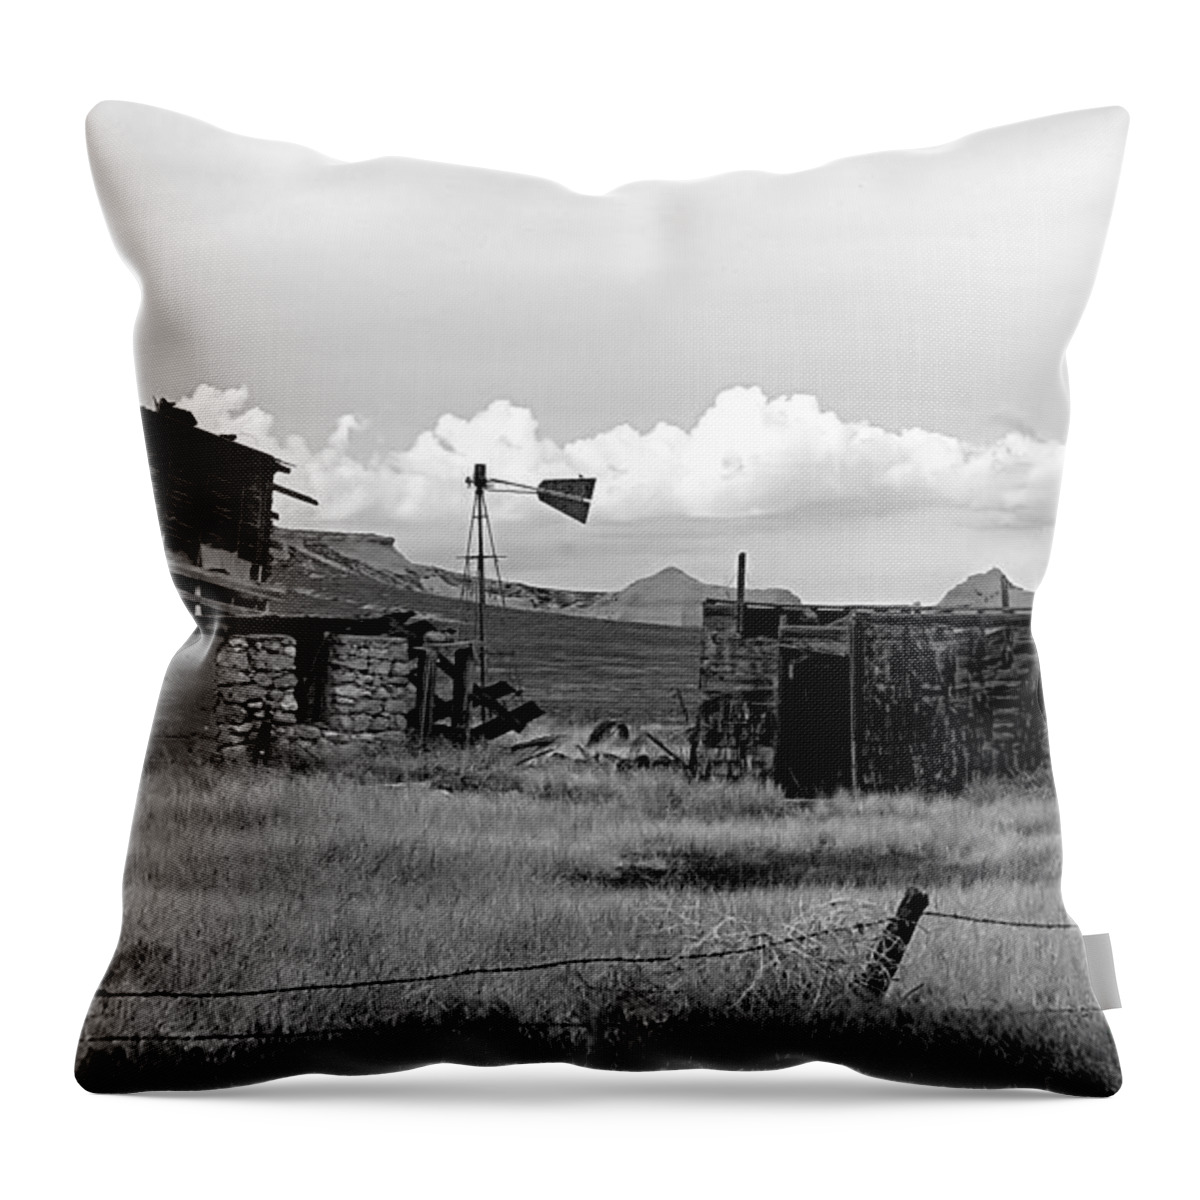 Landscape Throw Pillow featuring the photograph Old Fort by Steven Reed